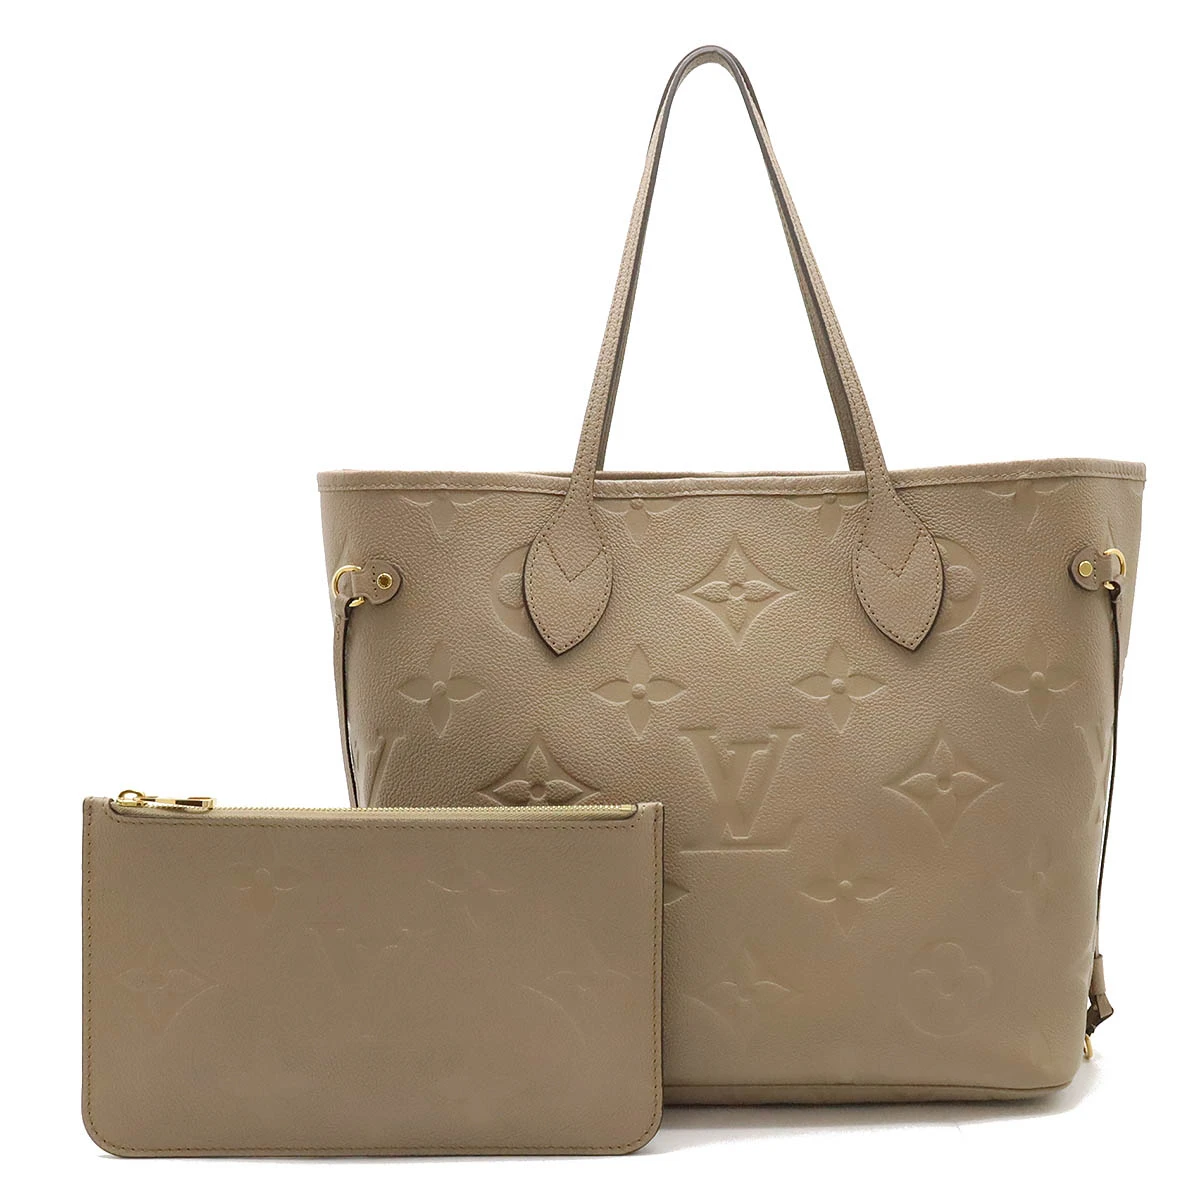 Louis Vuitton Monogram Empreinte Neverfull Tote Bag with Pouch